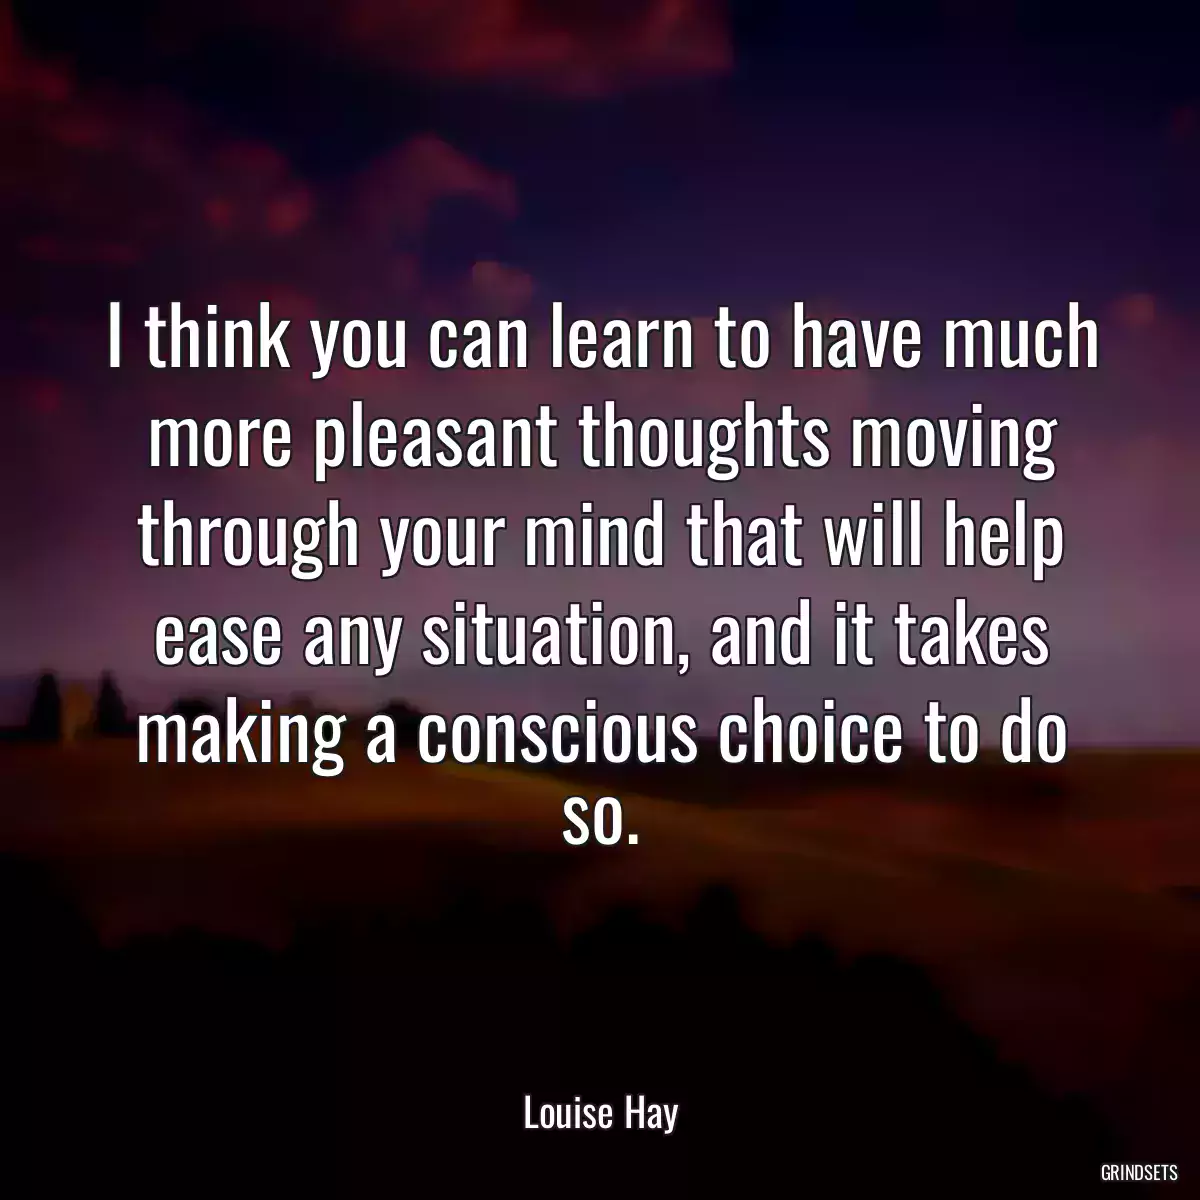 I think you can learn to have much more pleasant thoughts moving through your mind that will help ease any situation, and it takes making a conscious choice to do so.